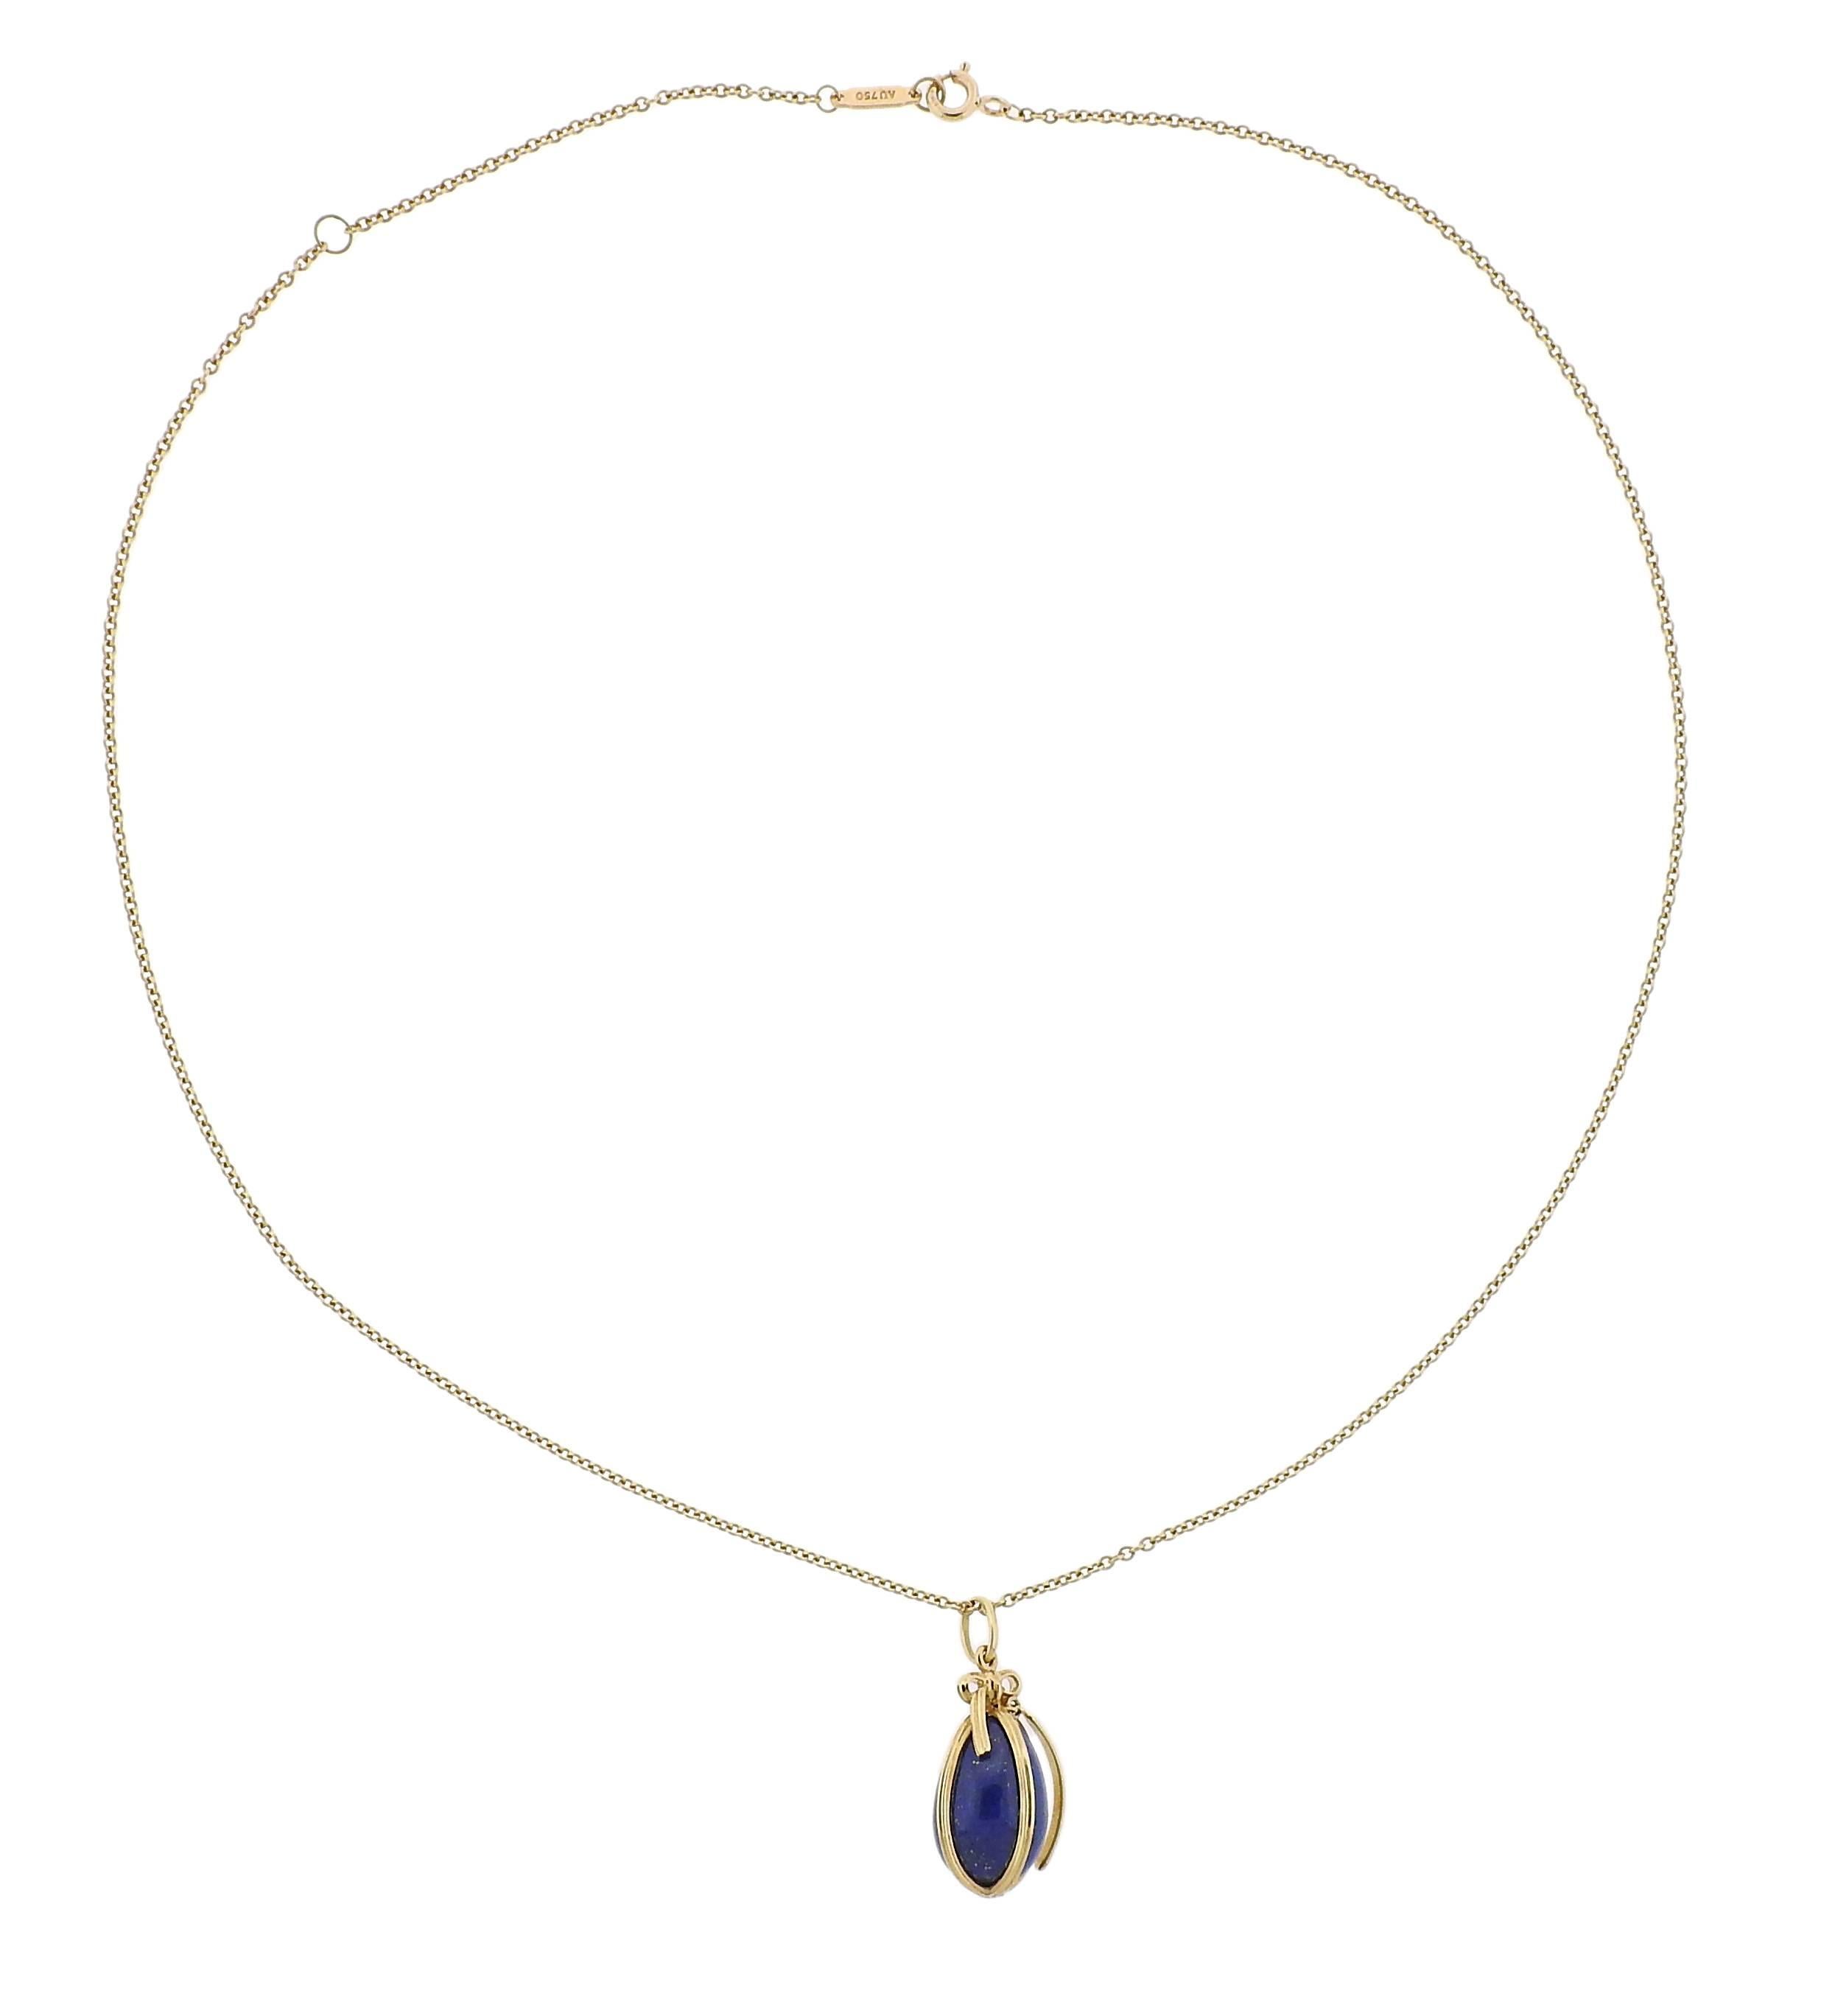 An 18k yellow gold pendant necklace, crafted by Jean Schlumberger for Tiffany & Co, featuring lapis lazuli egg charm.  Necklace is 18 inches long, Pendant measures 26mm x 12.5mm. Marked: Tiffany & Co, , Schlumberger Studios, T & Co,